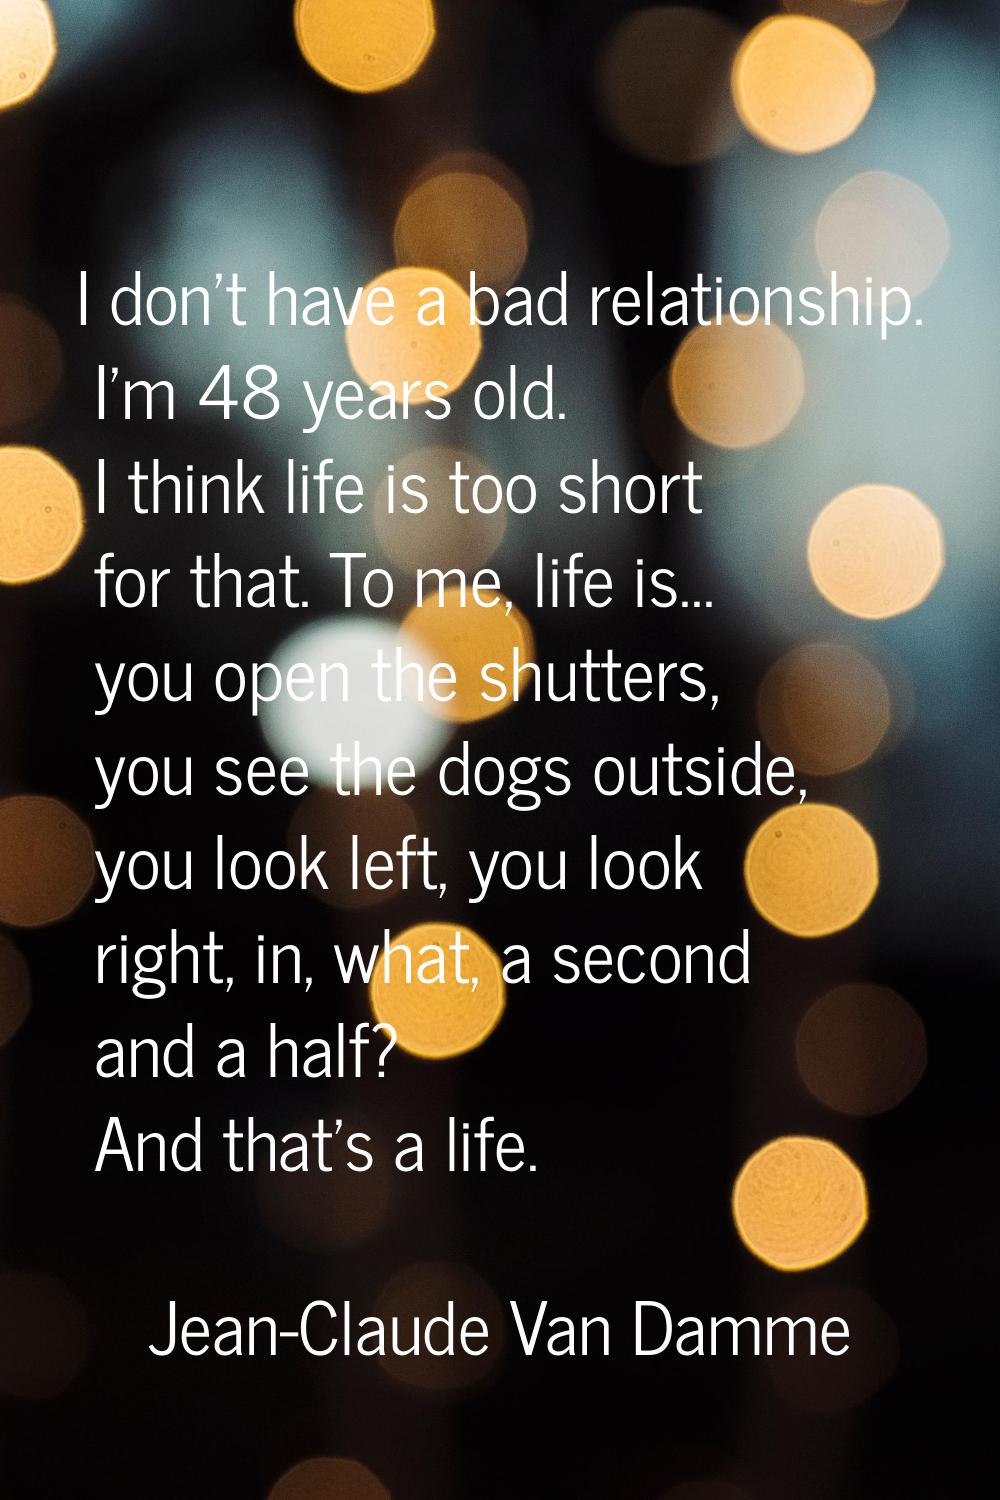 I don't have a bad relationship. I'm 48 years old. I think life is too short for that. To me, life 